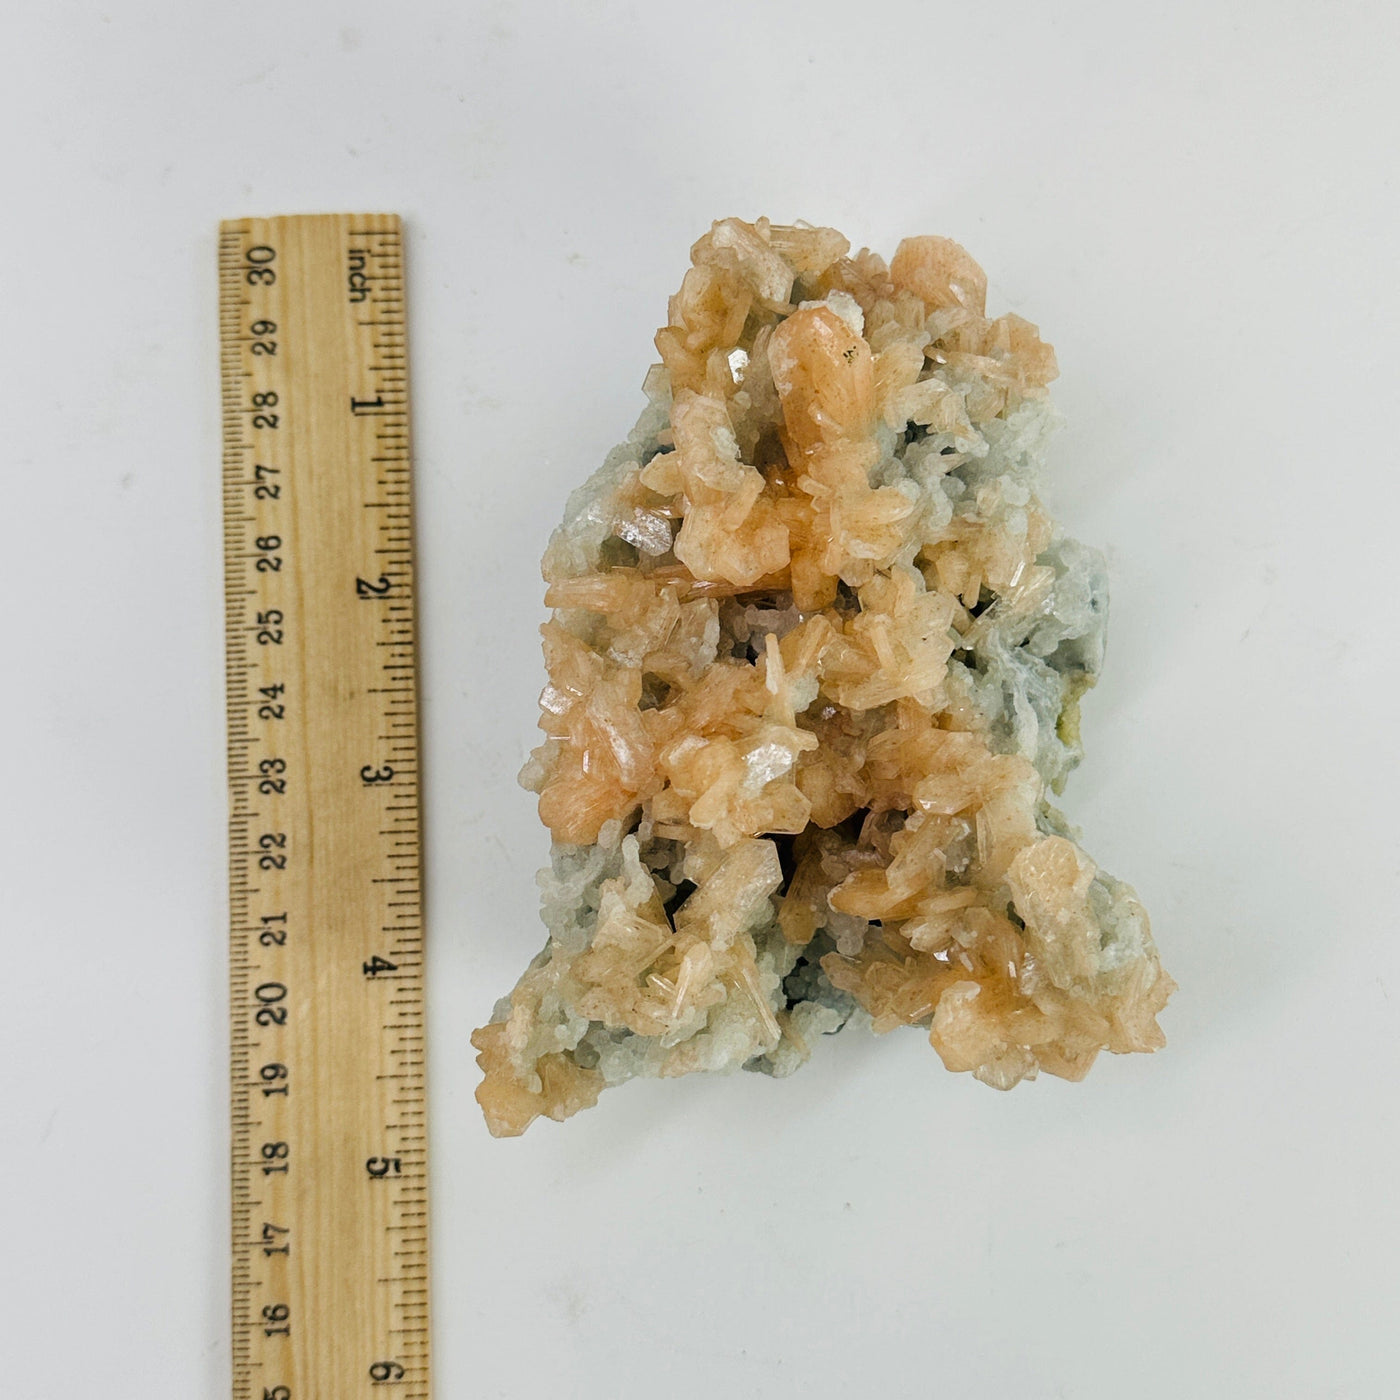 apophyllite with peach stilbite next to a ruler for size reference